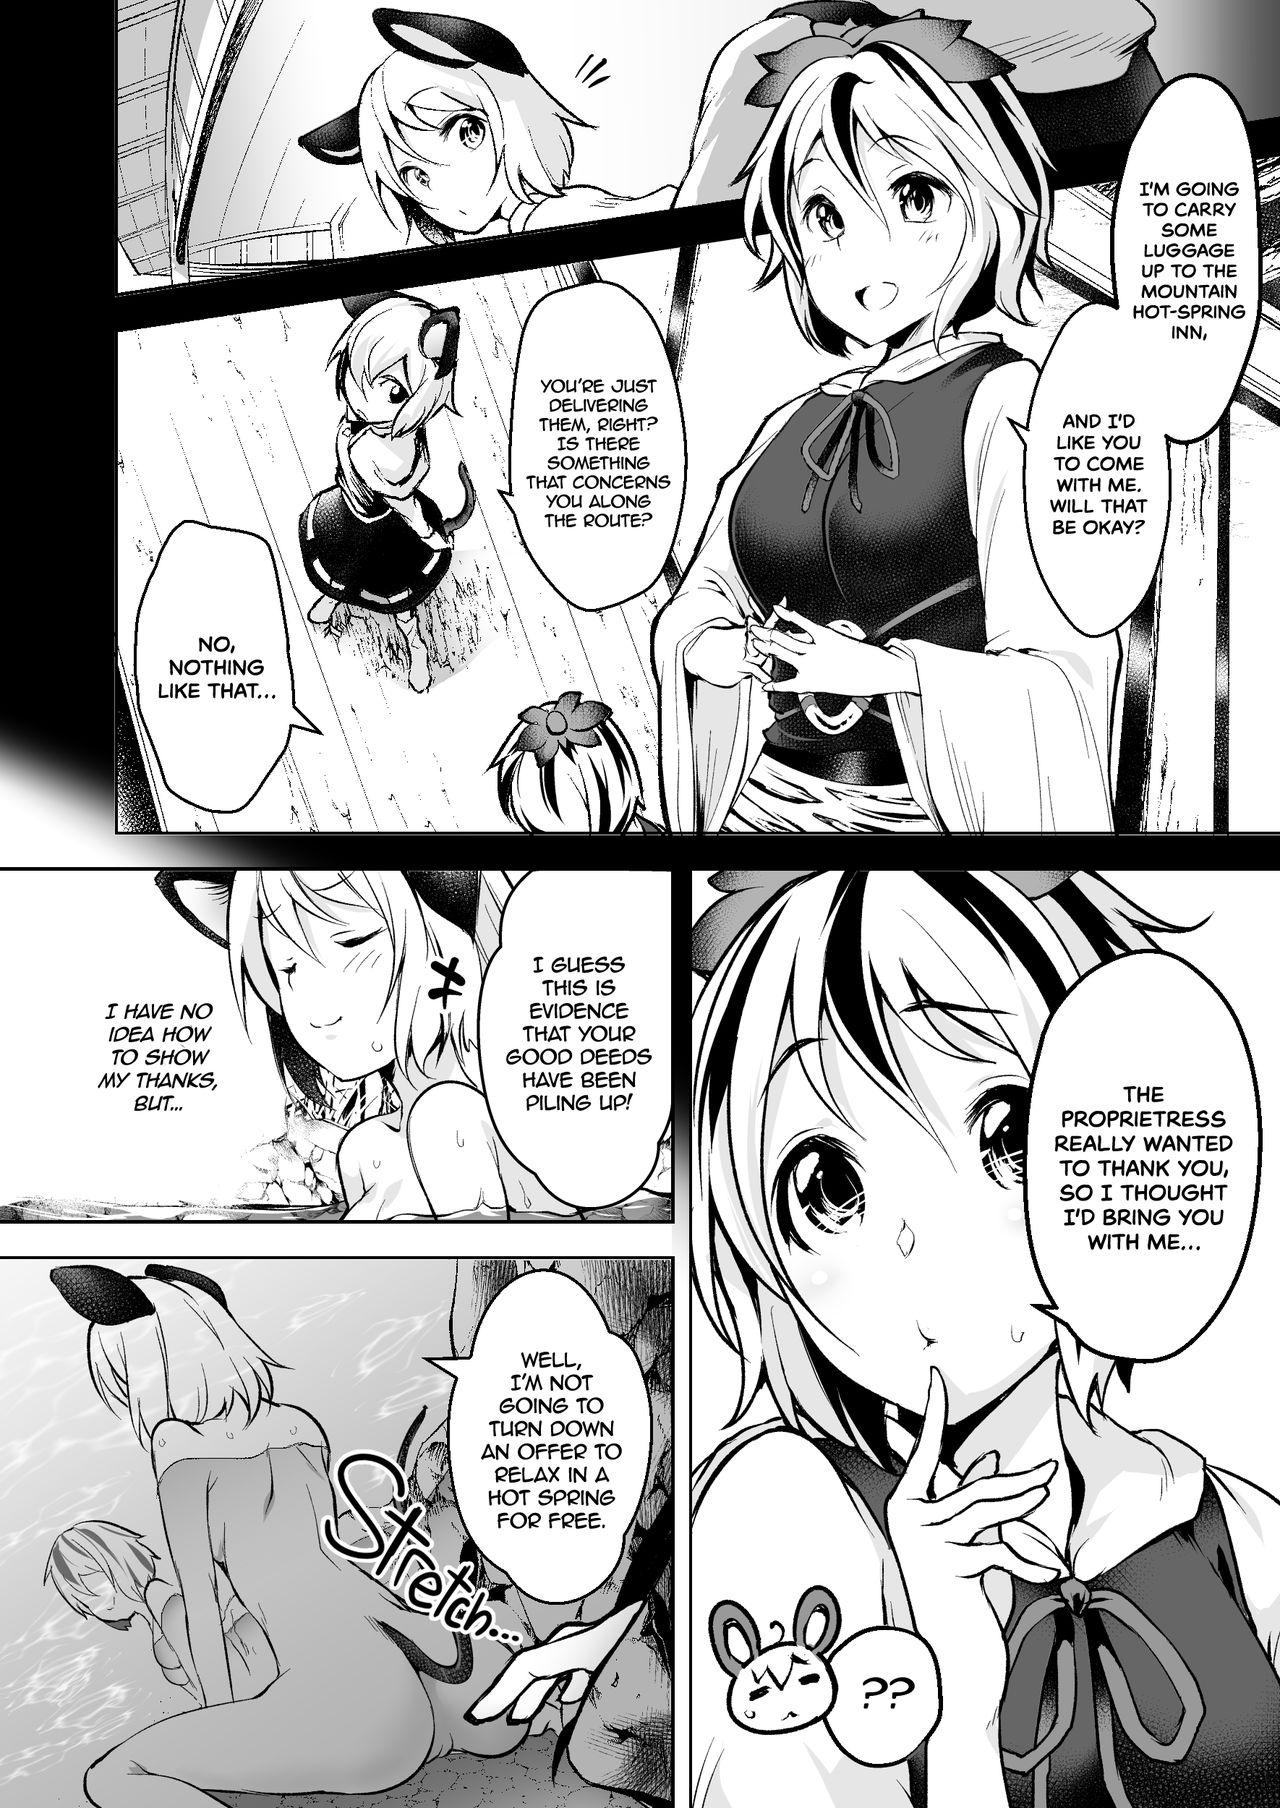 Aunt Fucking with Portals - Touhou project Chupa - Page 6